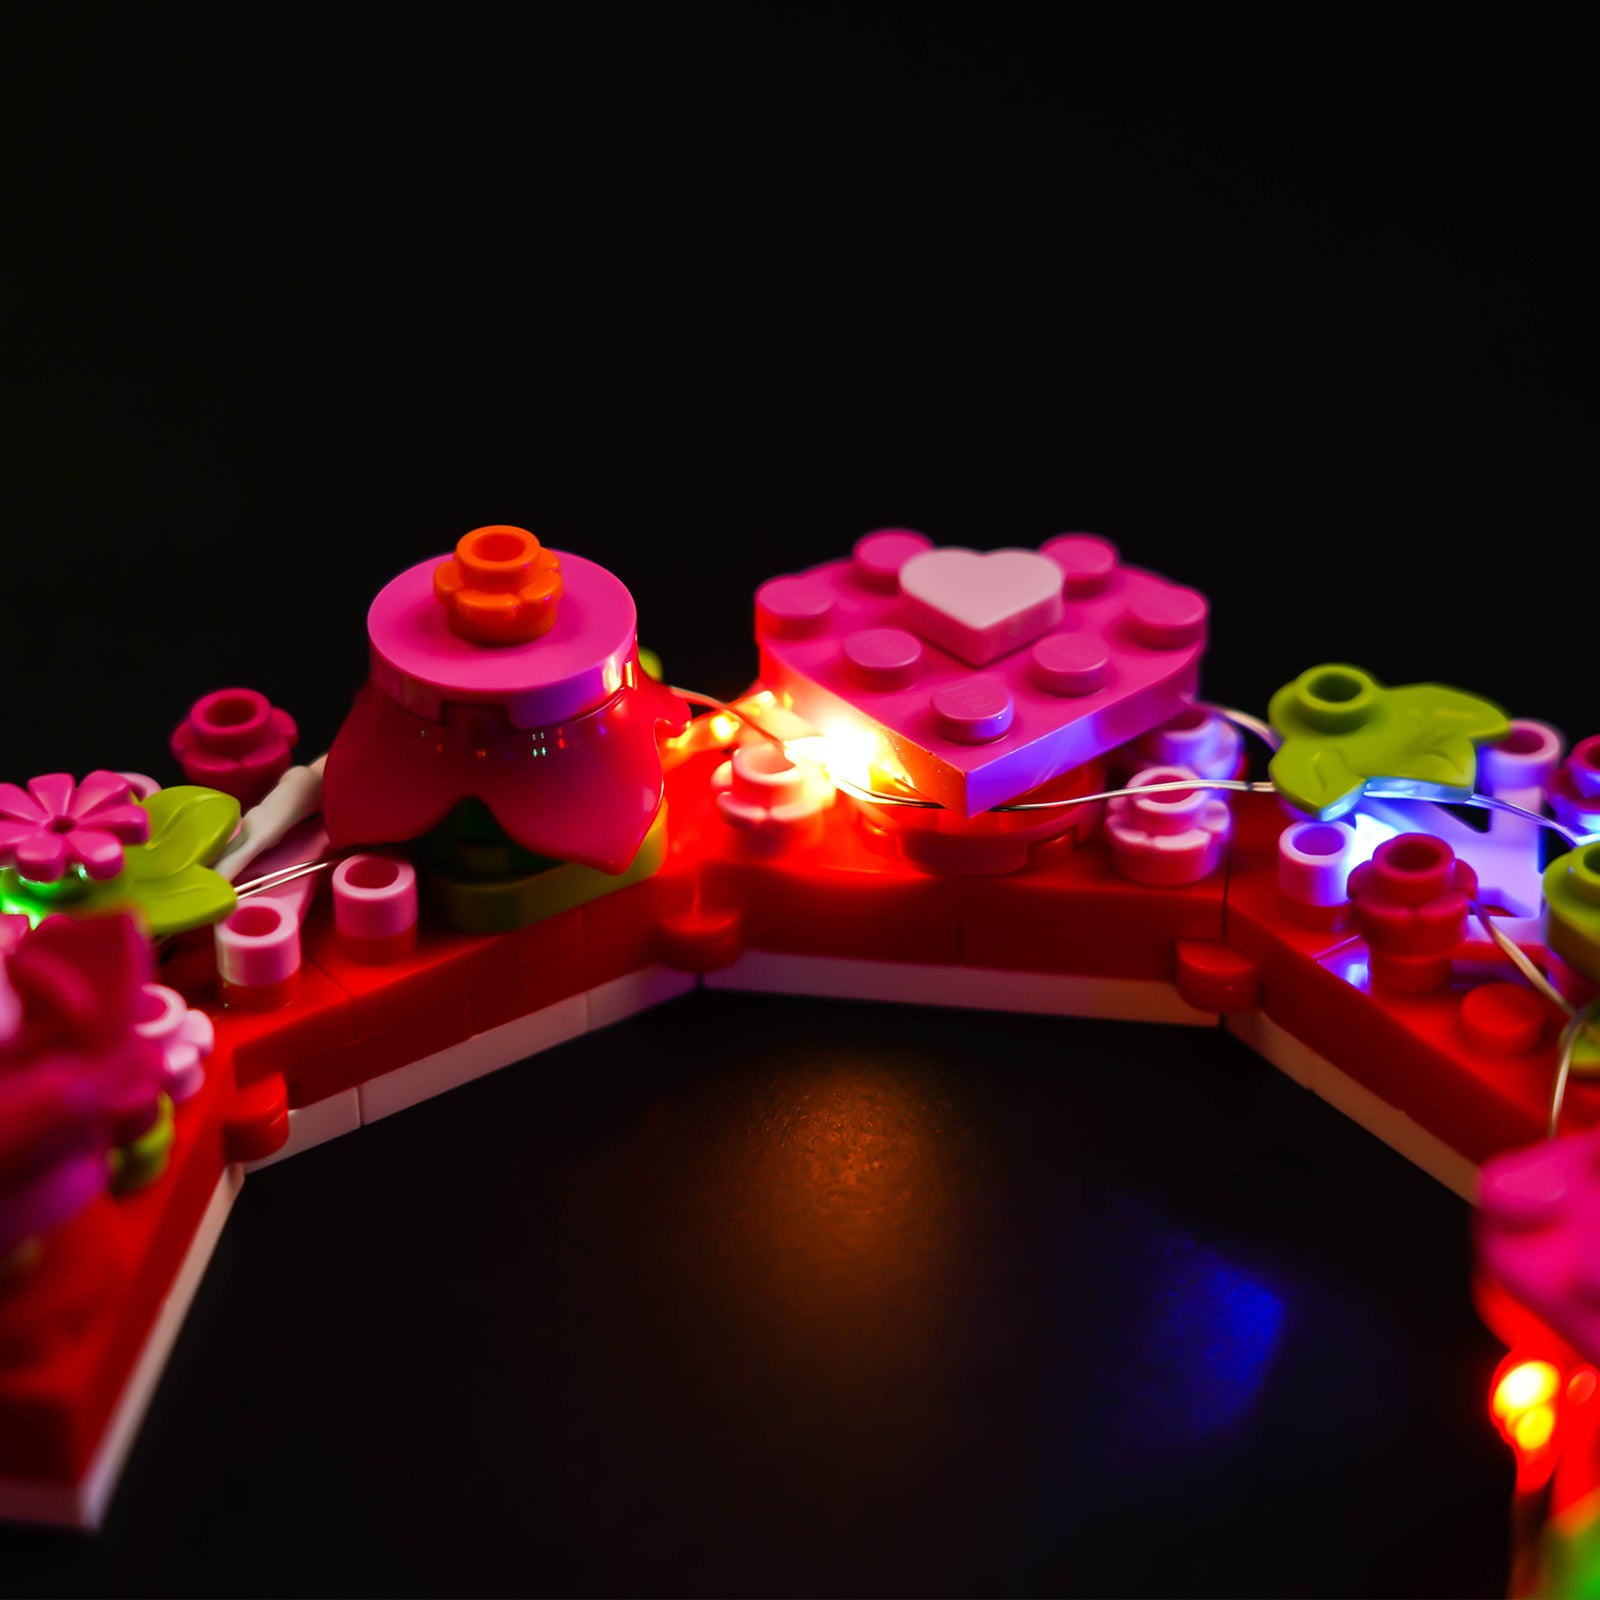 LEGO 40638 Heart Ornament review